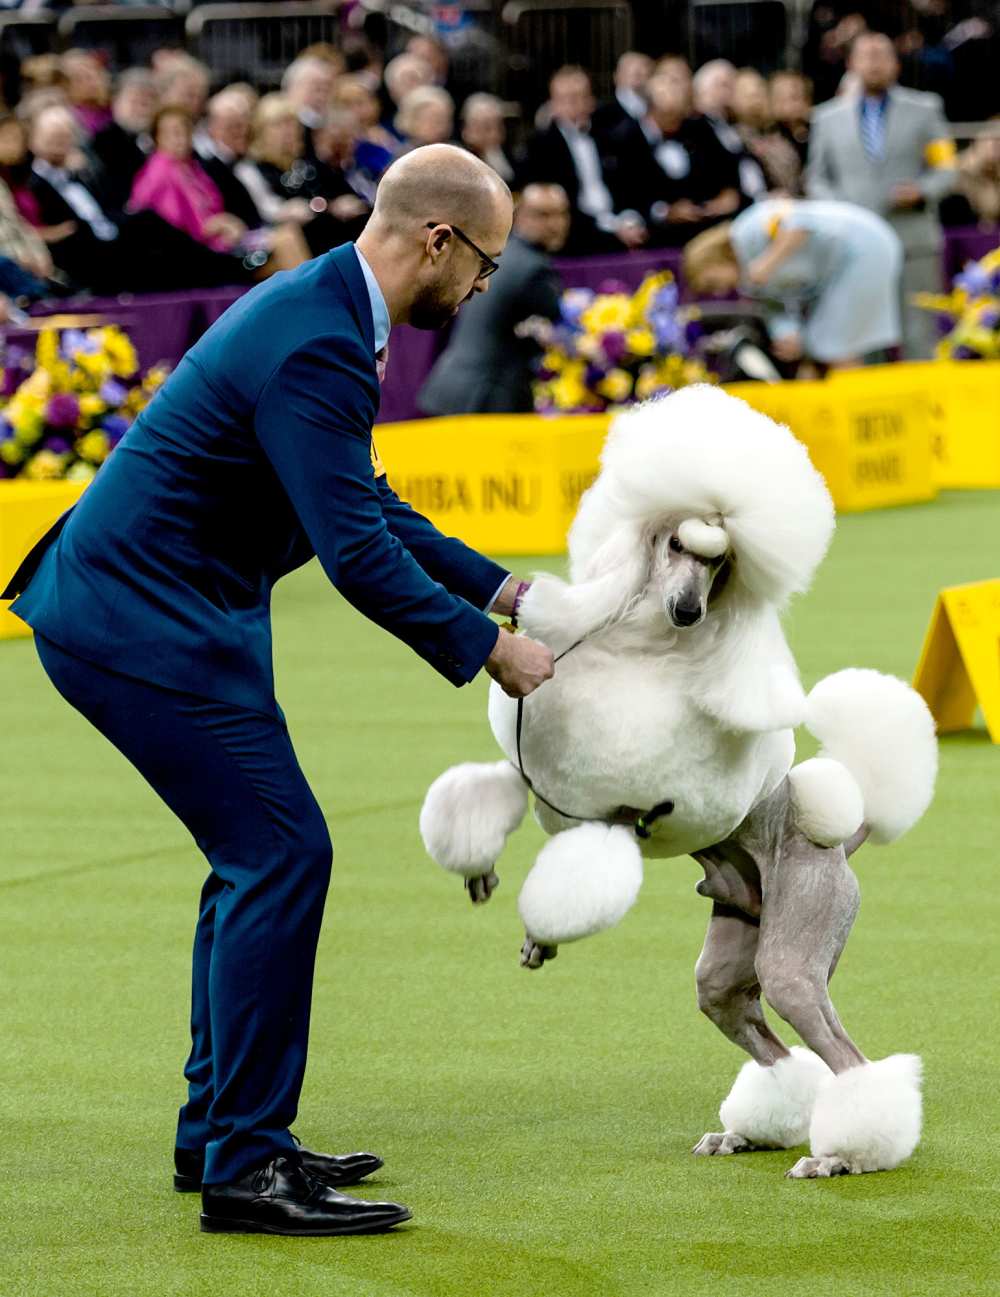 Best of breed Standard Poodle CH Afterglow Tyrone Power competes to represent the Non-Sporting group in the Best in Show final of the 141st Westminster Kennel Club Dog Show at Madison Square Garden on February 13, 2017 in New York City.